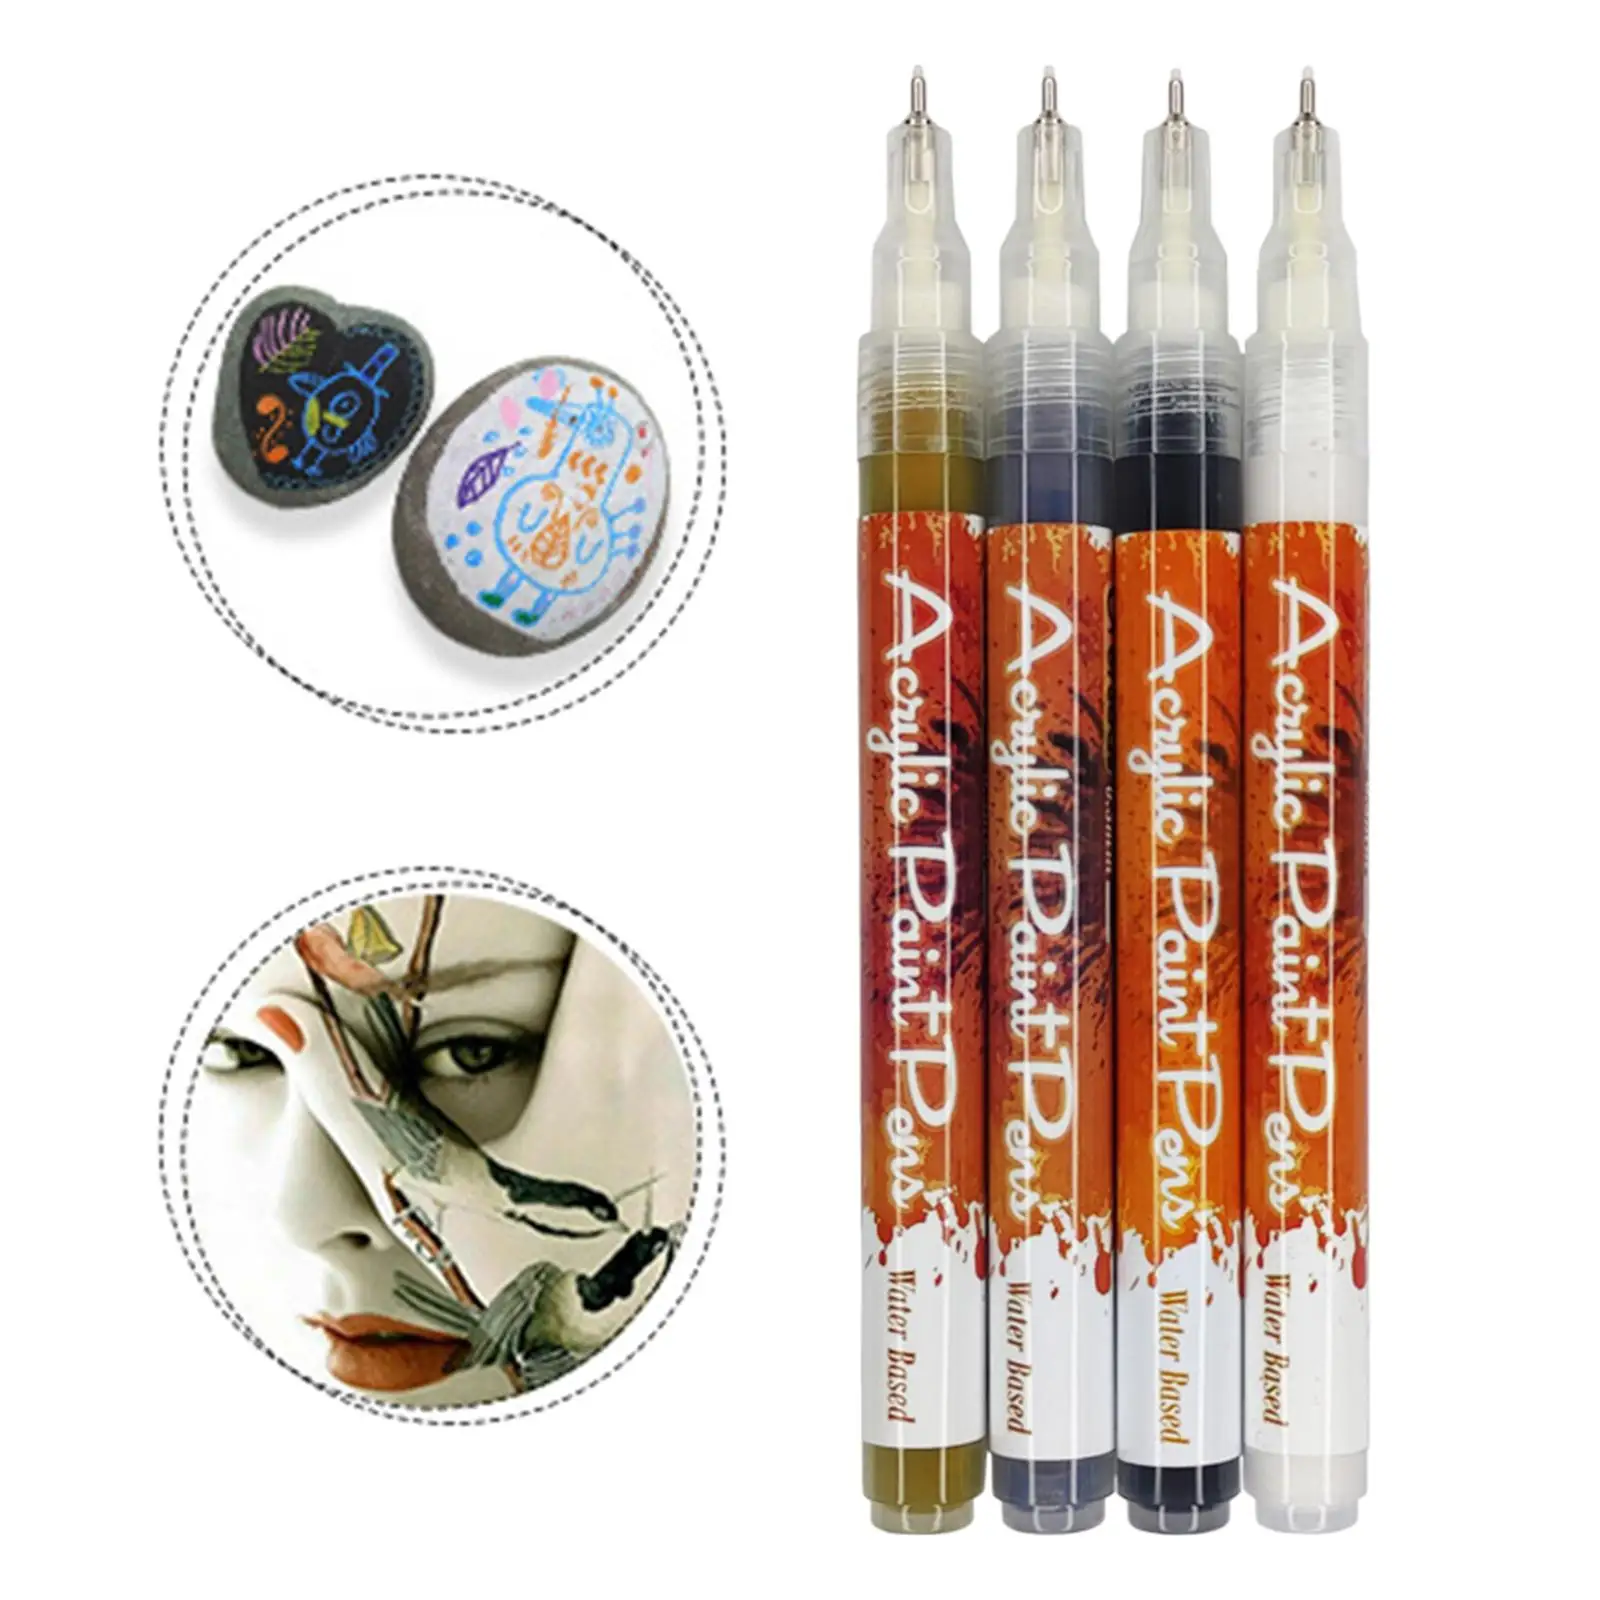 4 Colors Acrylic Paint Pens Permanent Marker Pens for Rock Wood Canvas Ceramic , Kids Birthday Gift